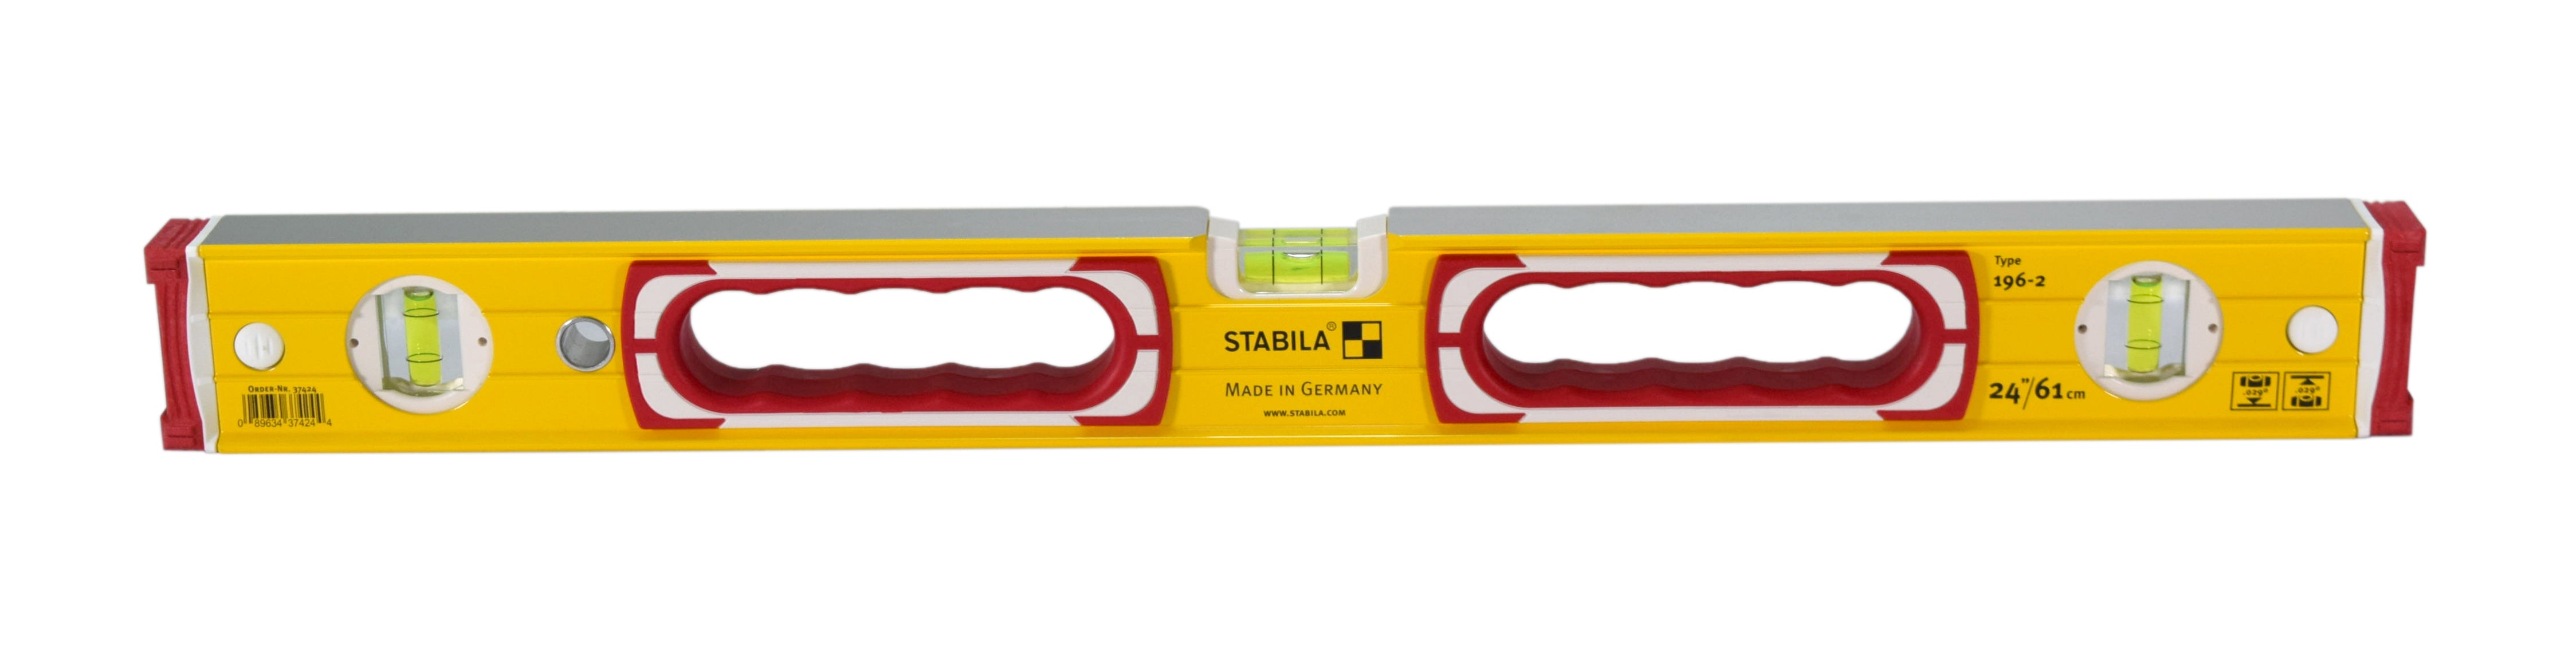 Stabila-37424-24-Heavy-Duty-Aluminum-Builders-Level-with-Shock-Absorbing-Caps-image-1